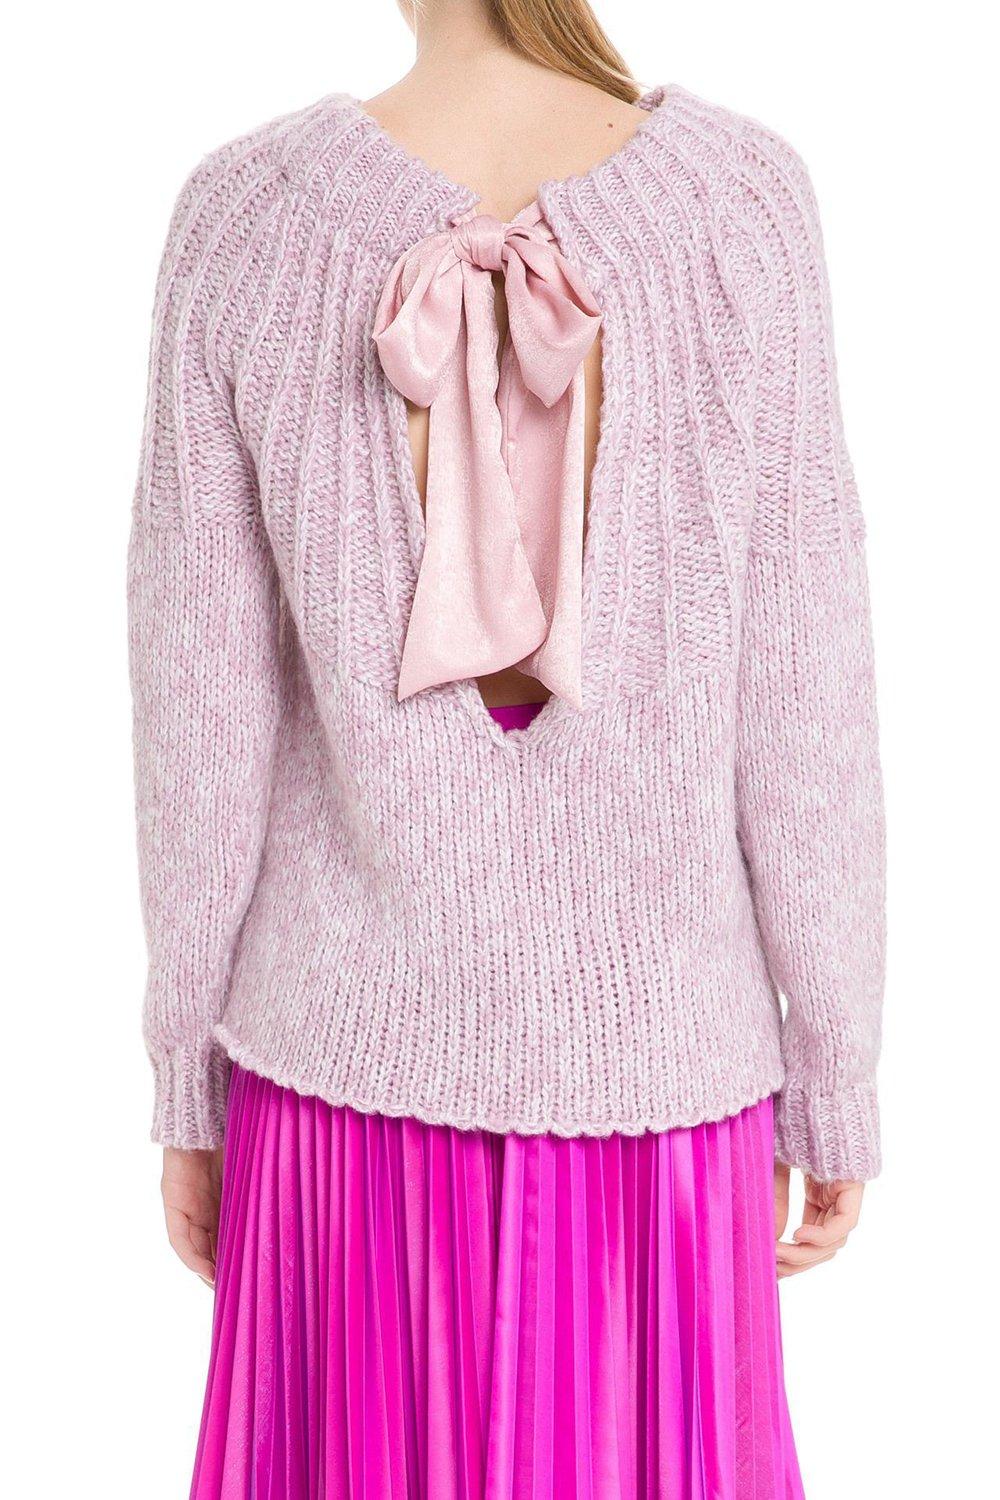 English Factory Chunky Knit Sweater With Tie in Pink - Lyst